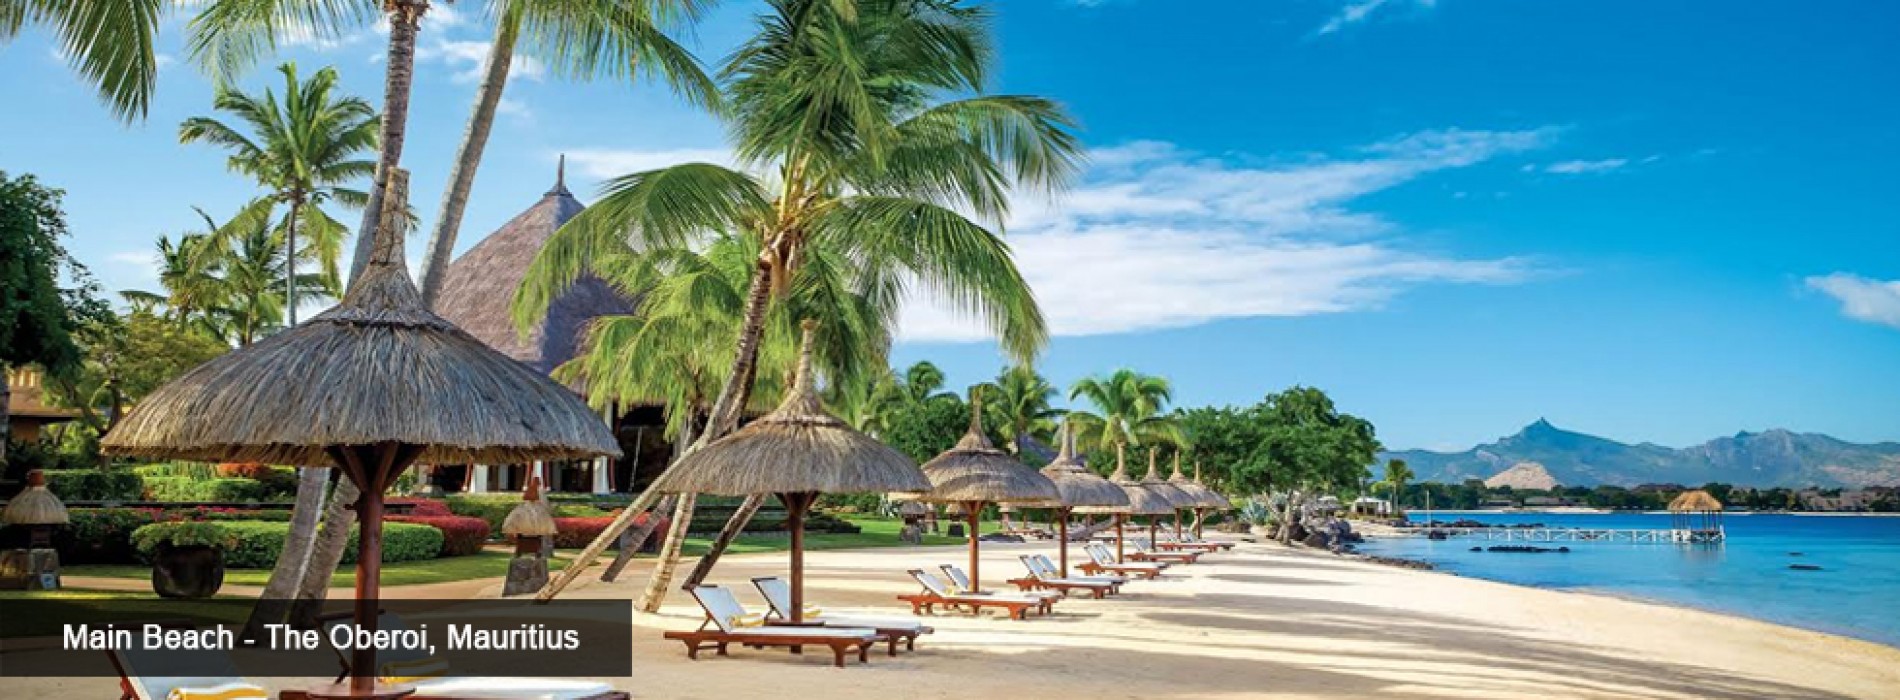 Special offers by the Oberoi group for its Mauritius and Dubai property